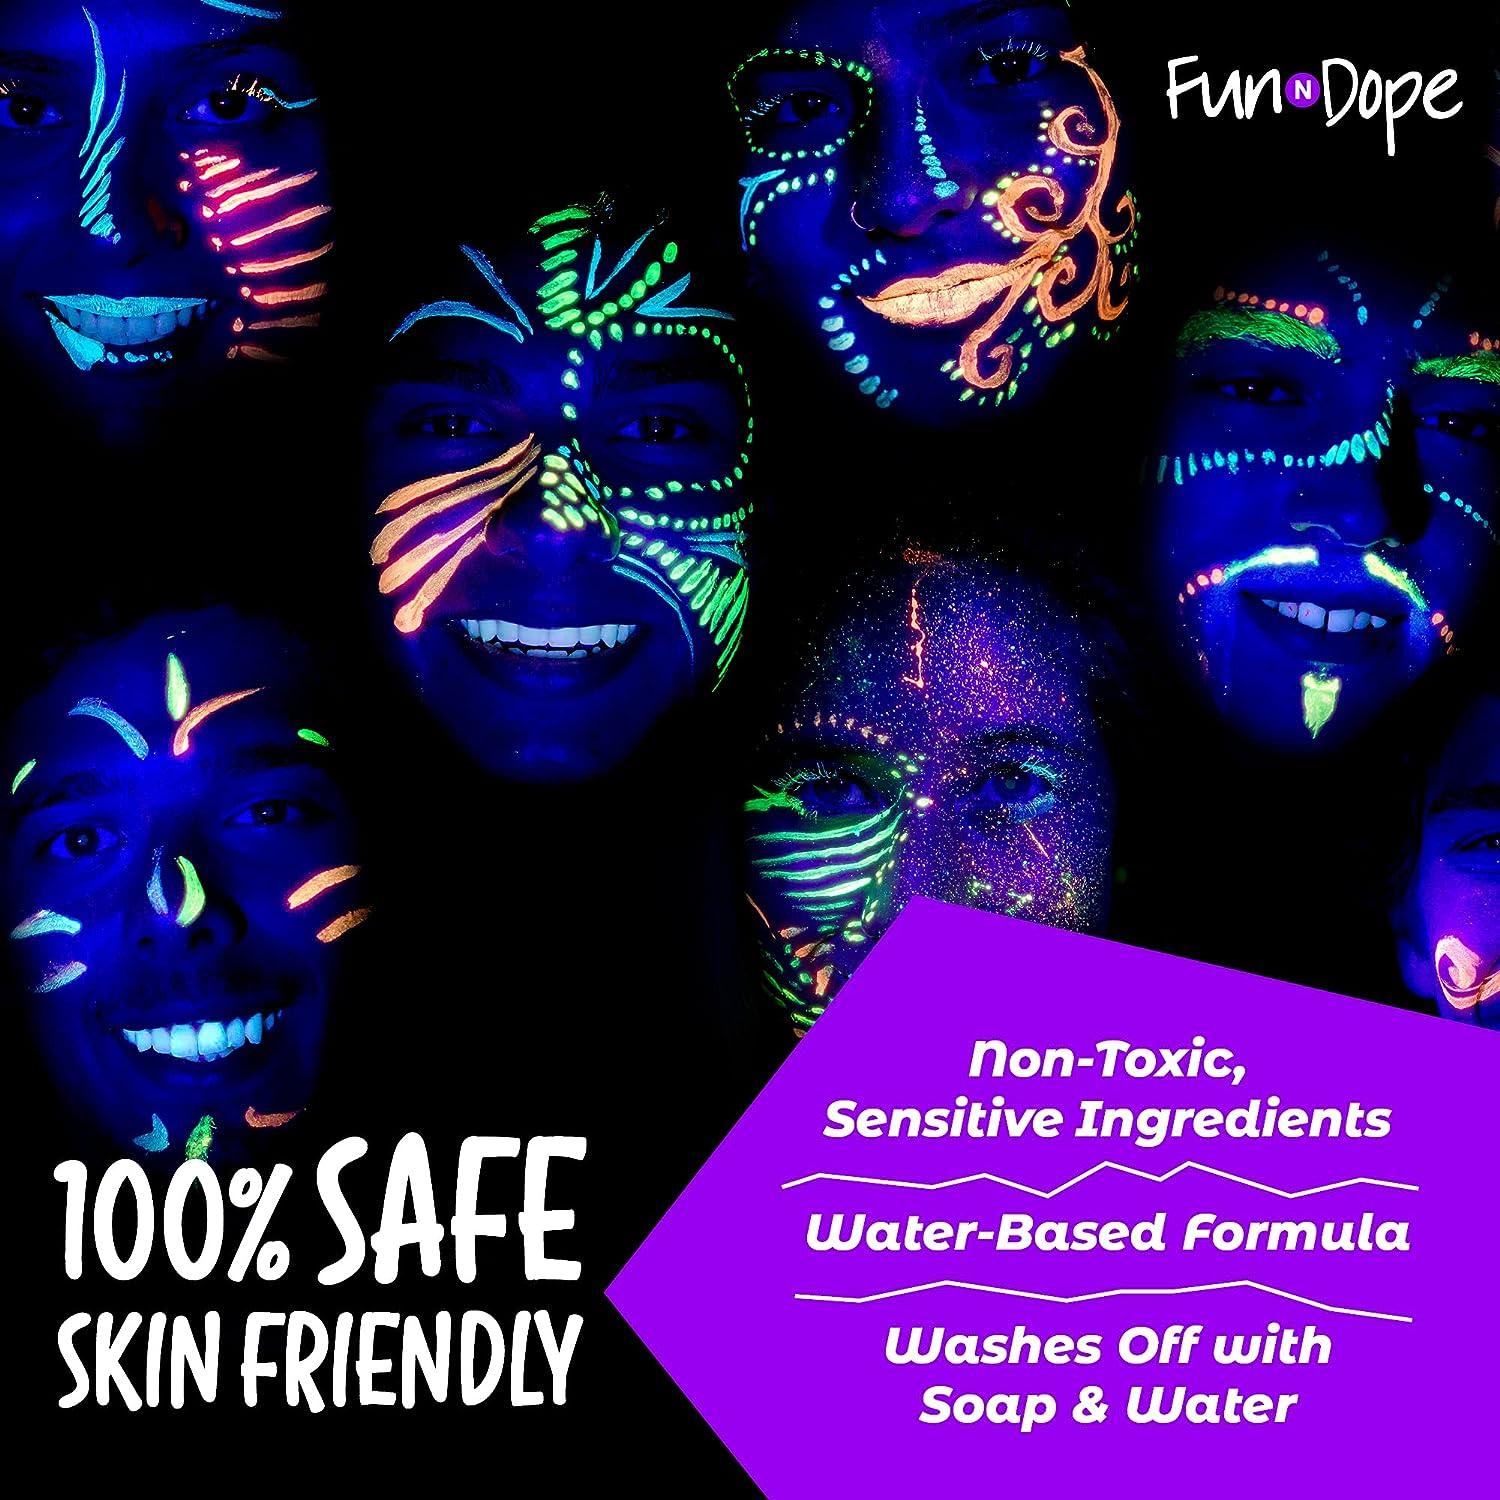 UV Body Paint and Face Paint - 8 Colors - Blacklight Reactive Paints - Body  Makeup Glows In the Dark for Black Light Parties Halloween Costume - Water  Based Washable Non-Toxic Neon Party Supplies